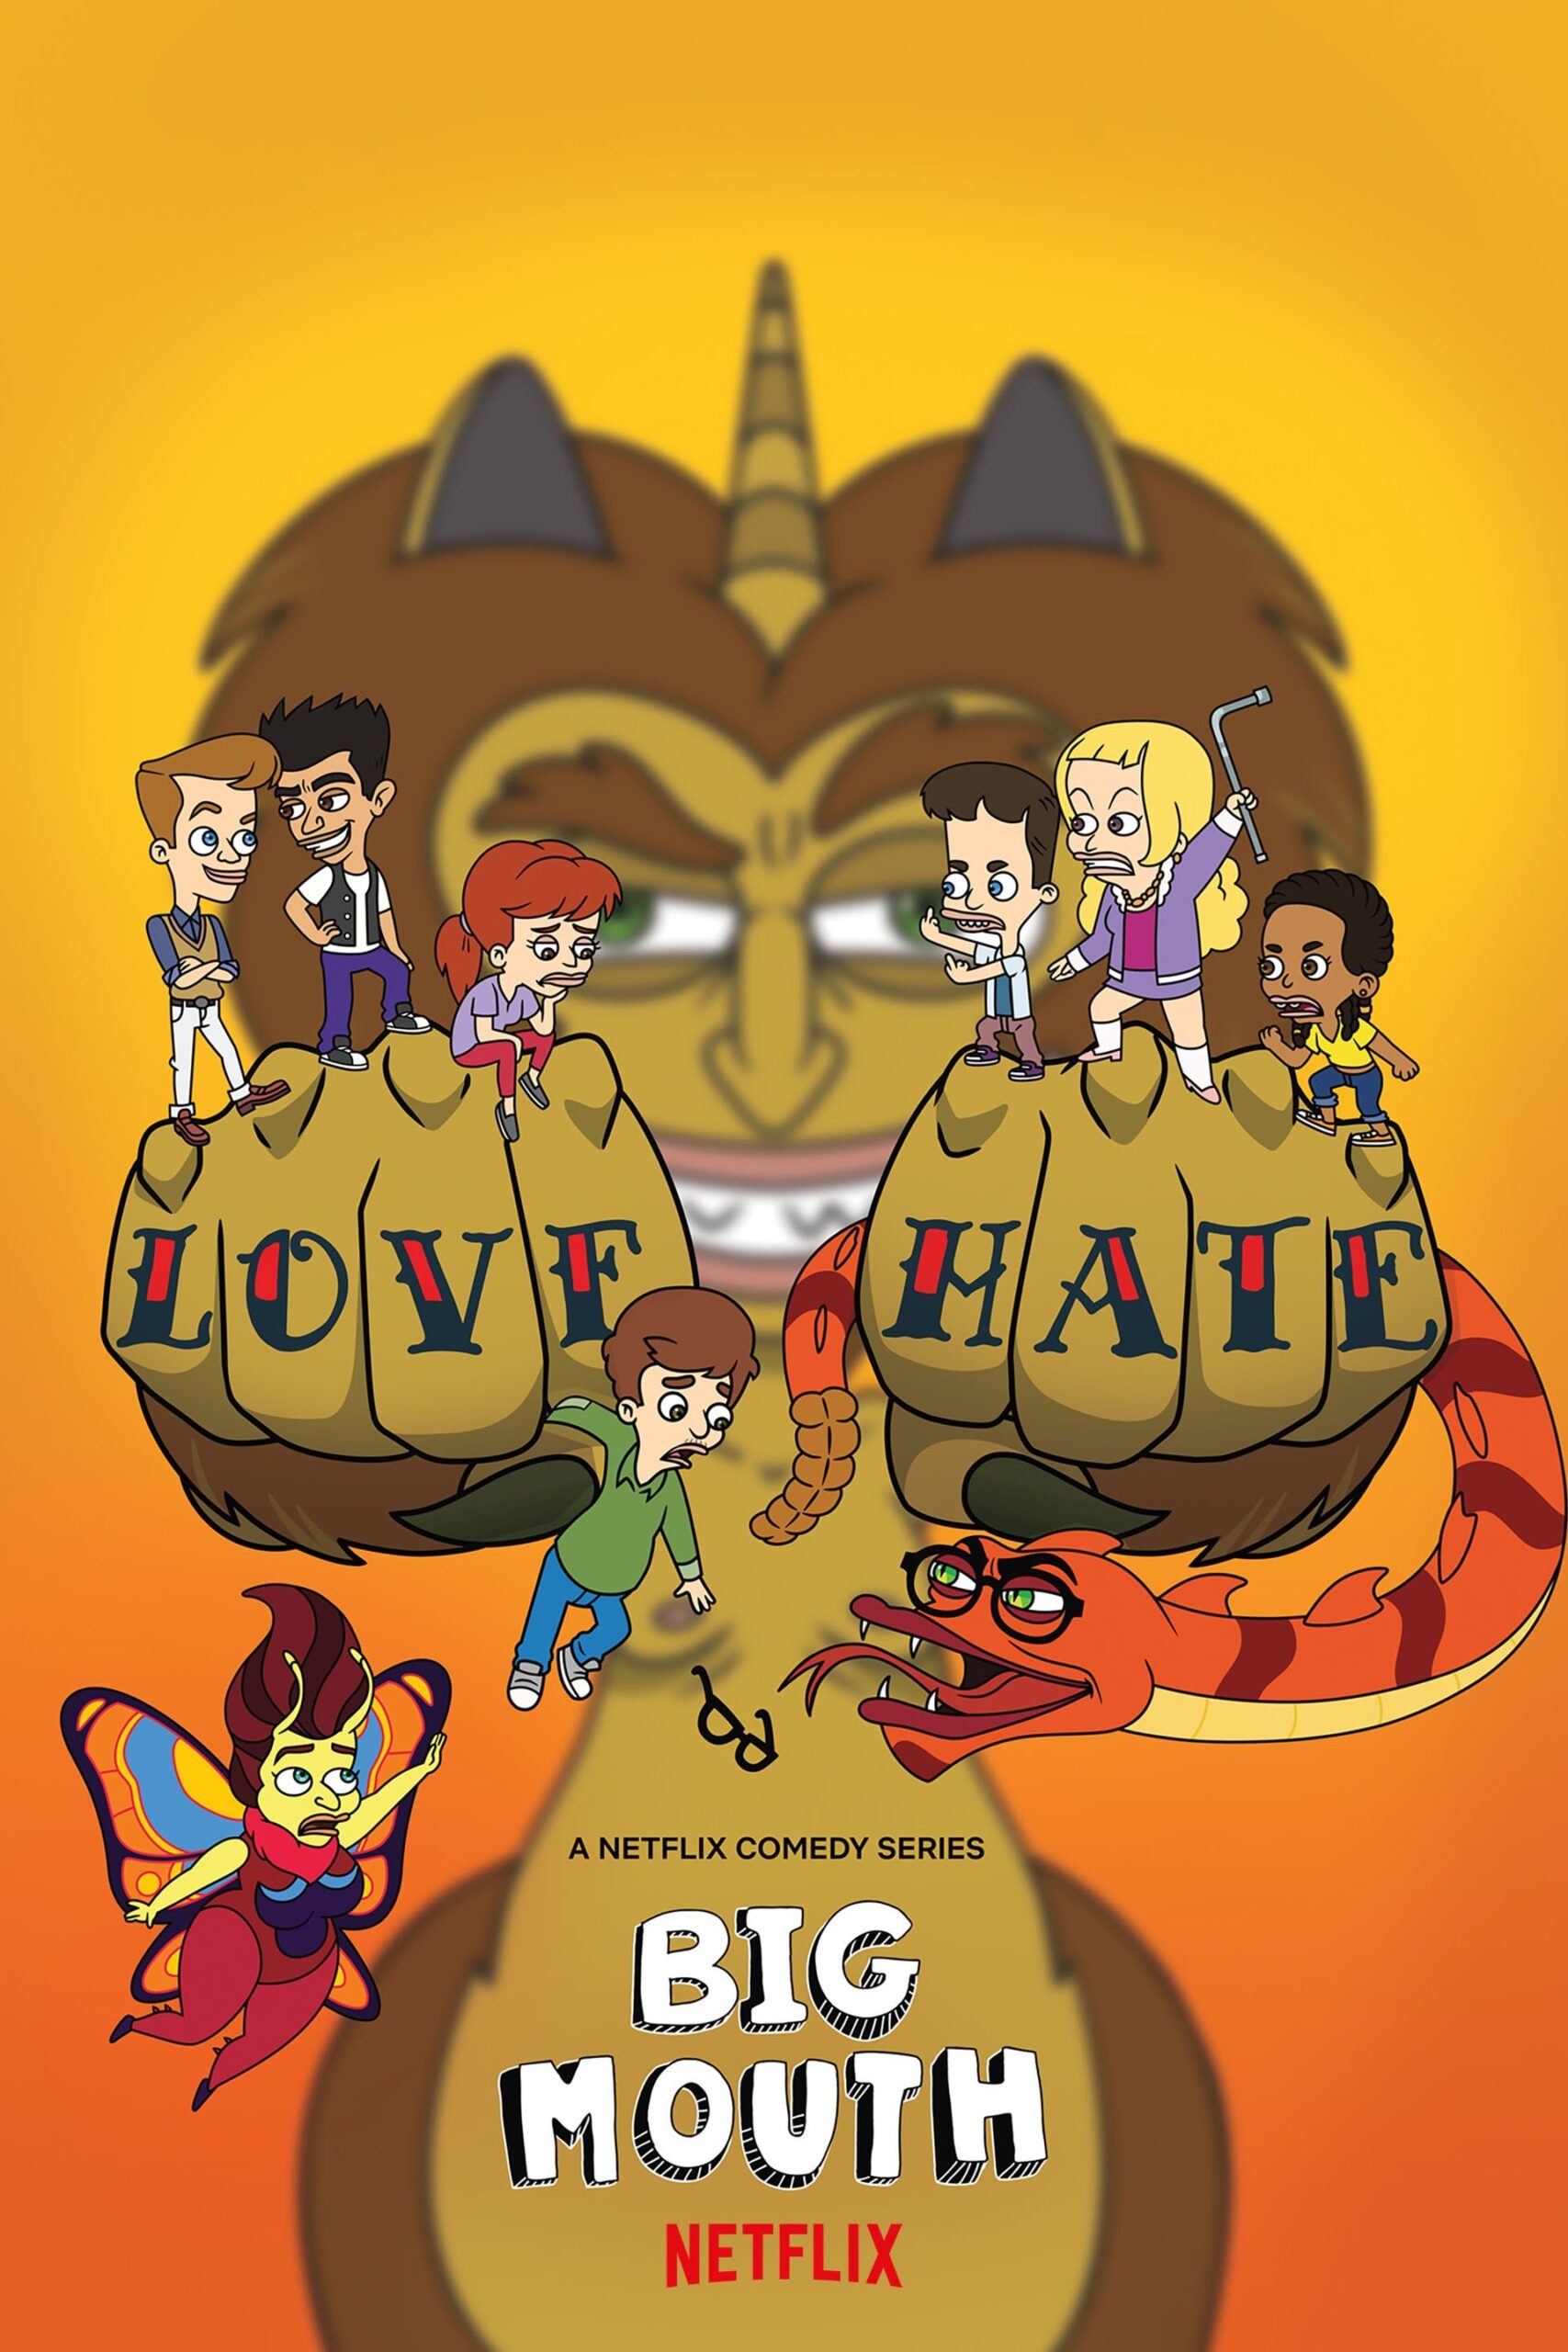 Is Big Mouth on Netflix